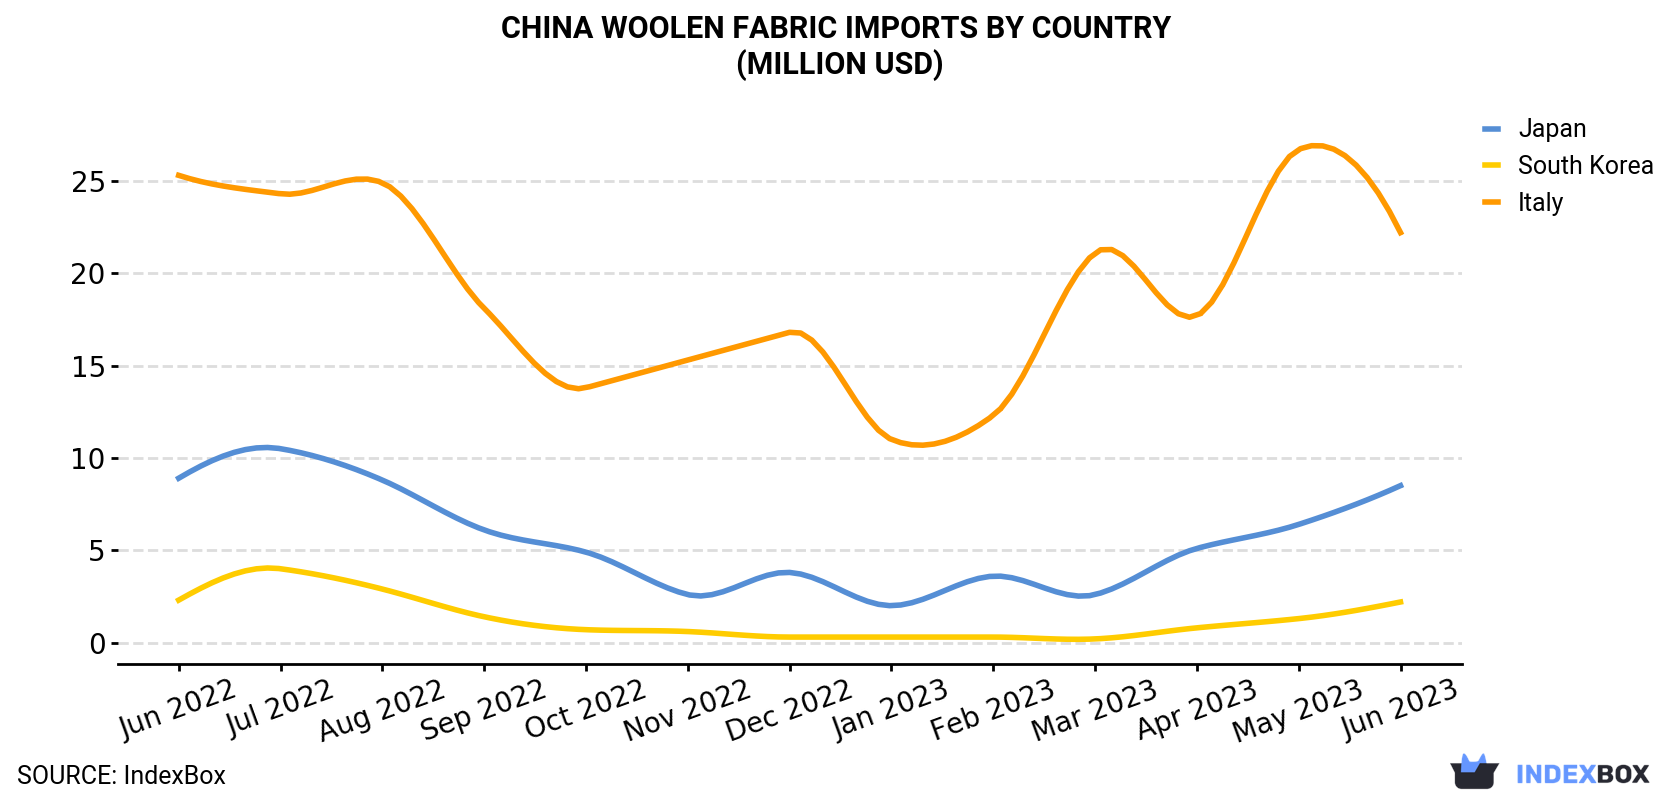 China Woolen Fabric Imports By Country (Million USD)